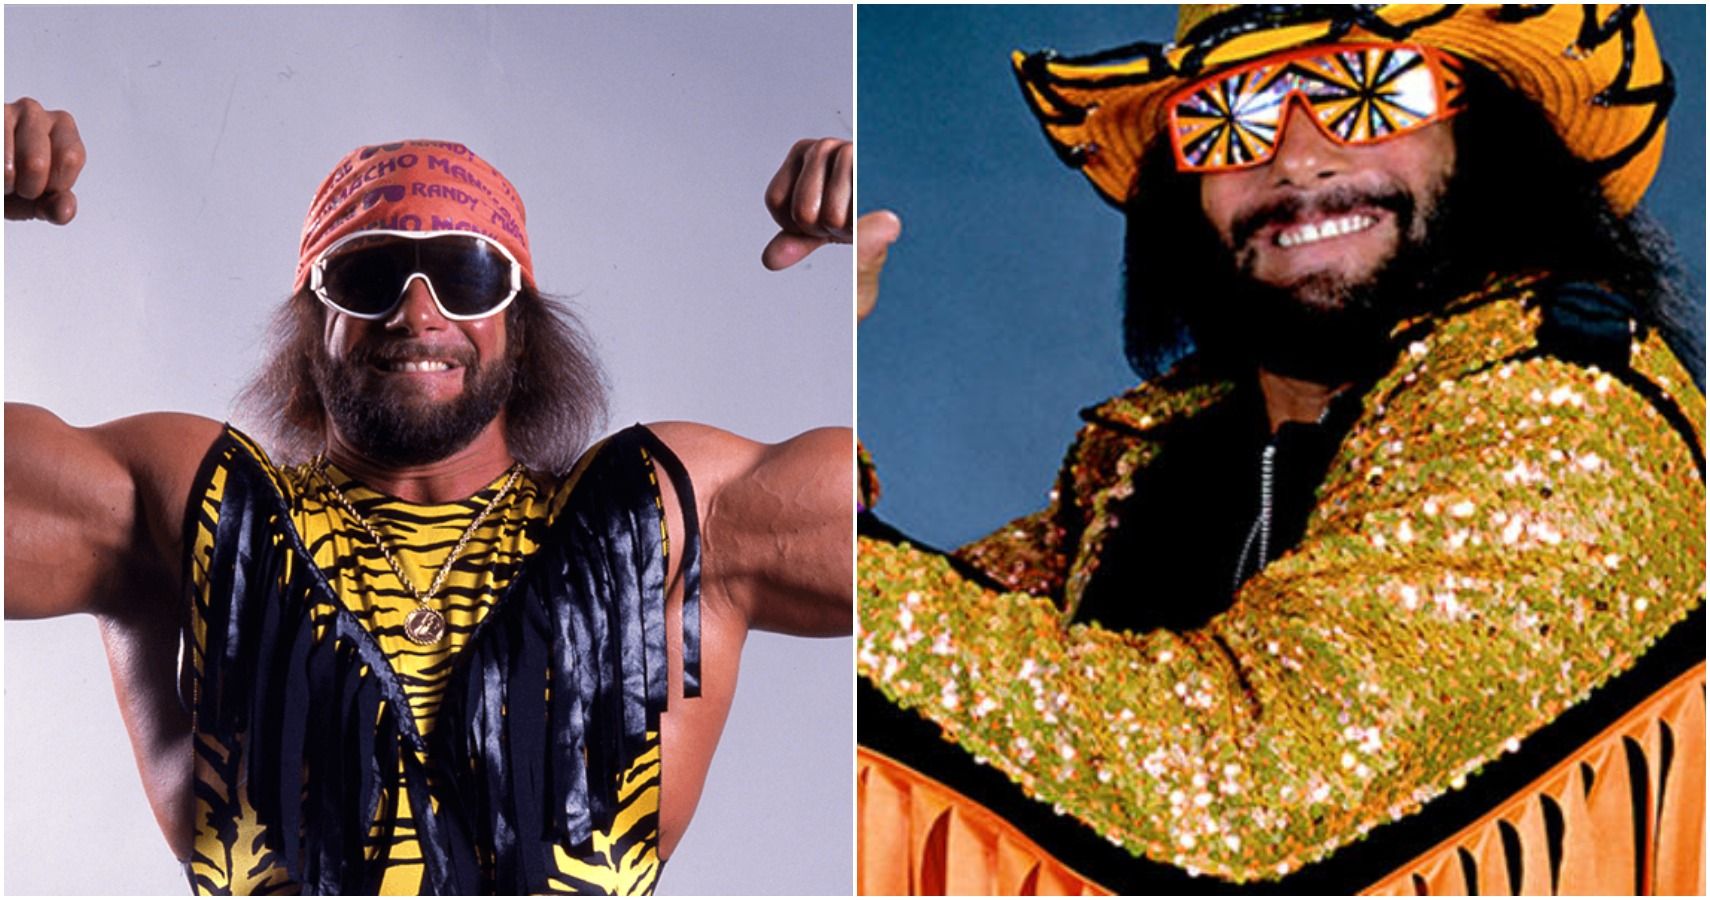 Macho Man Randy Savage: A Smaller WWE Wrestler With The Biggest